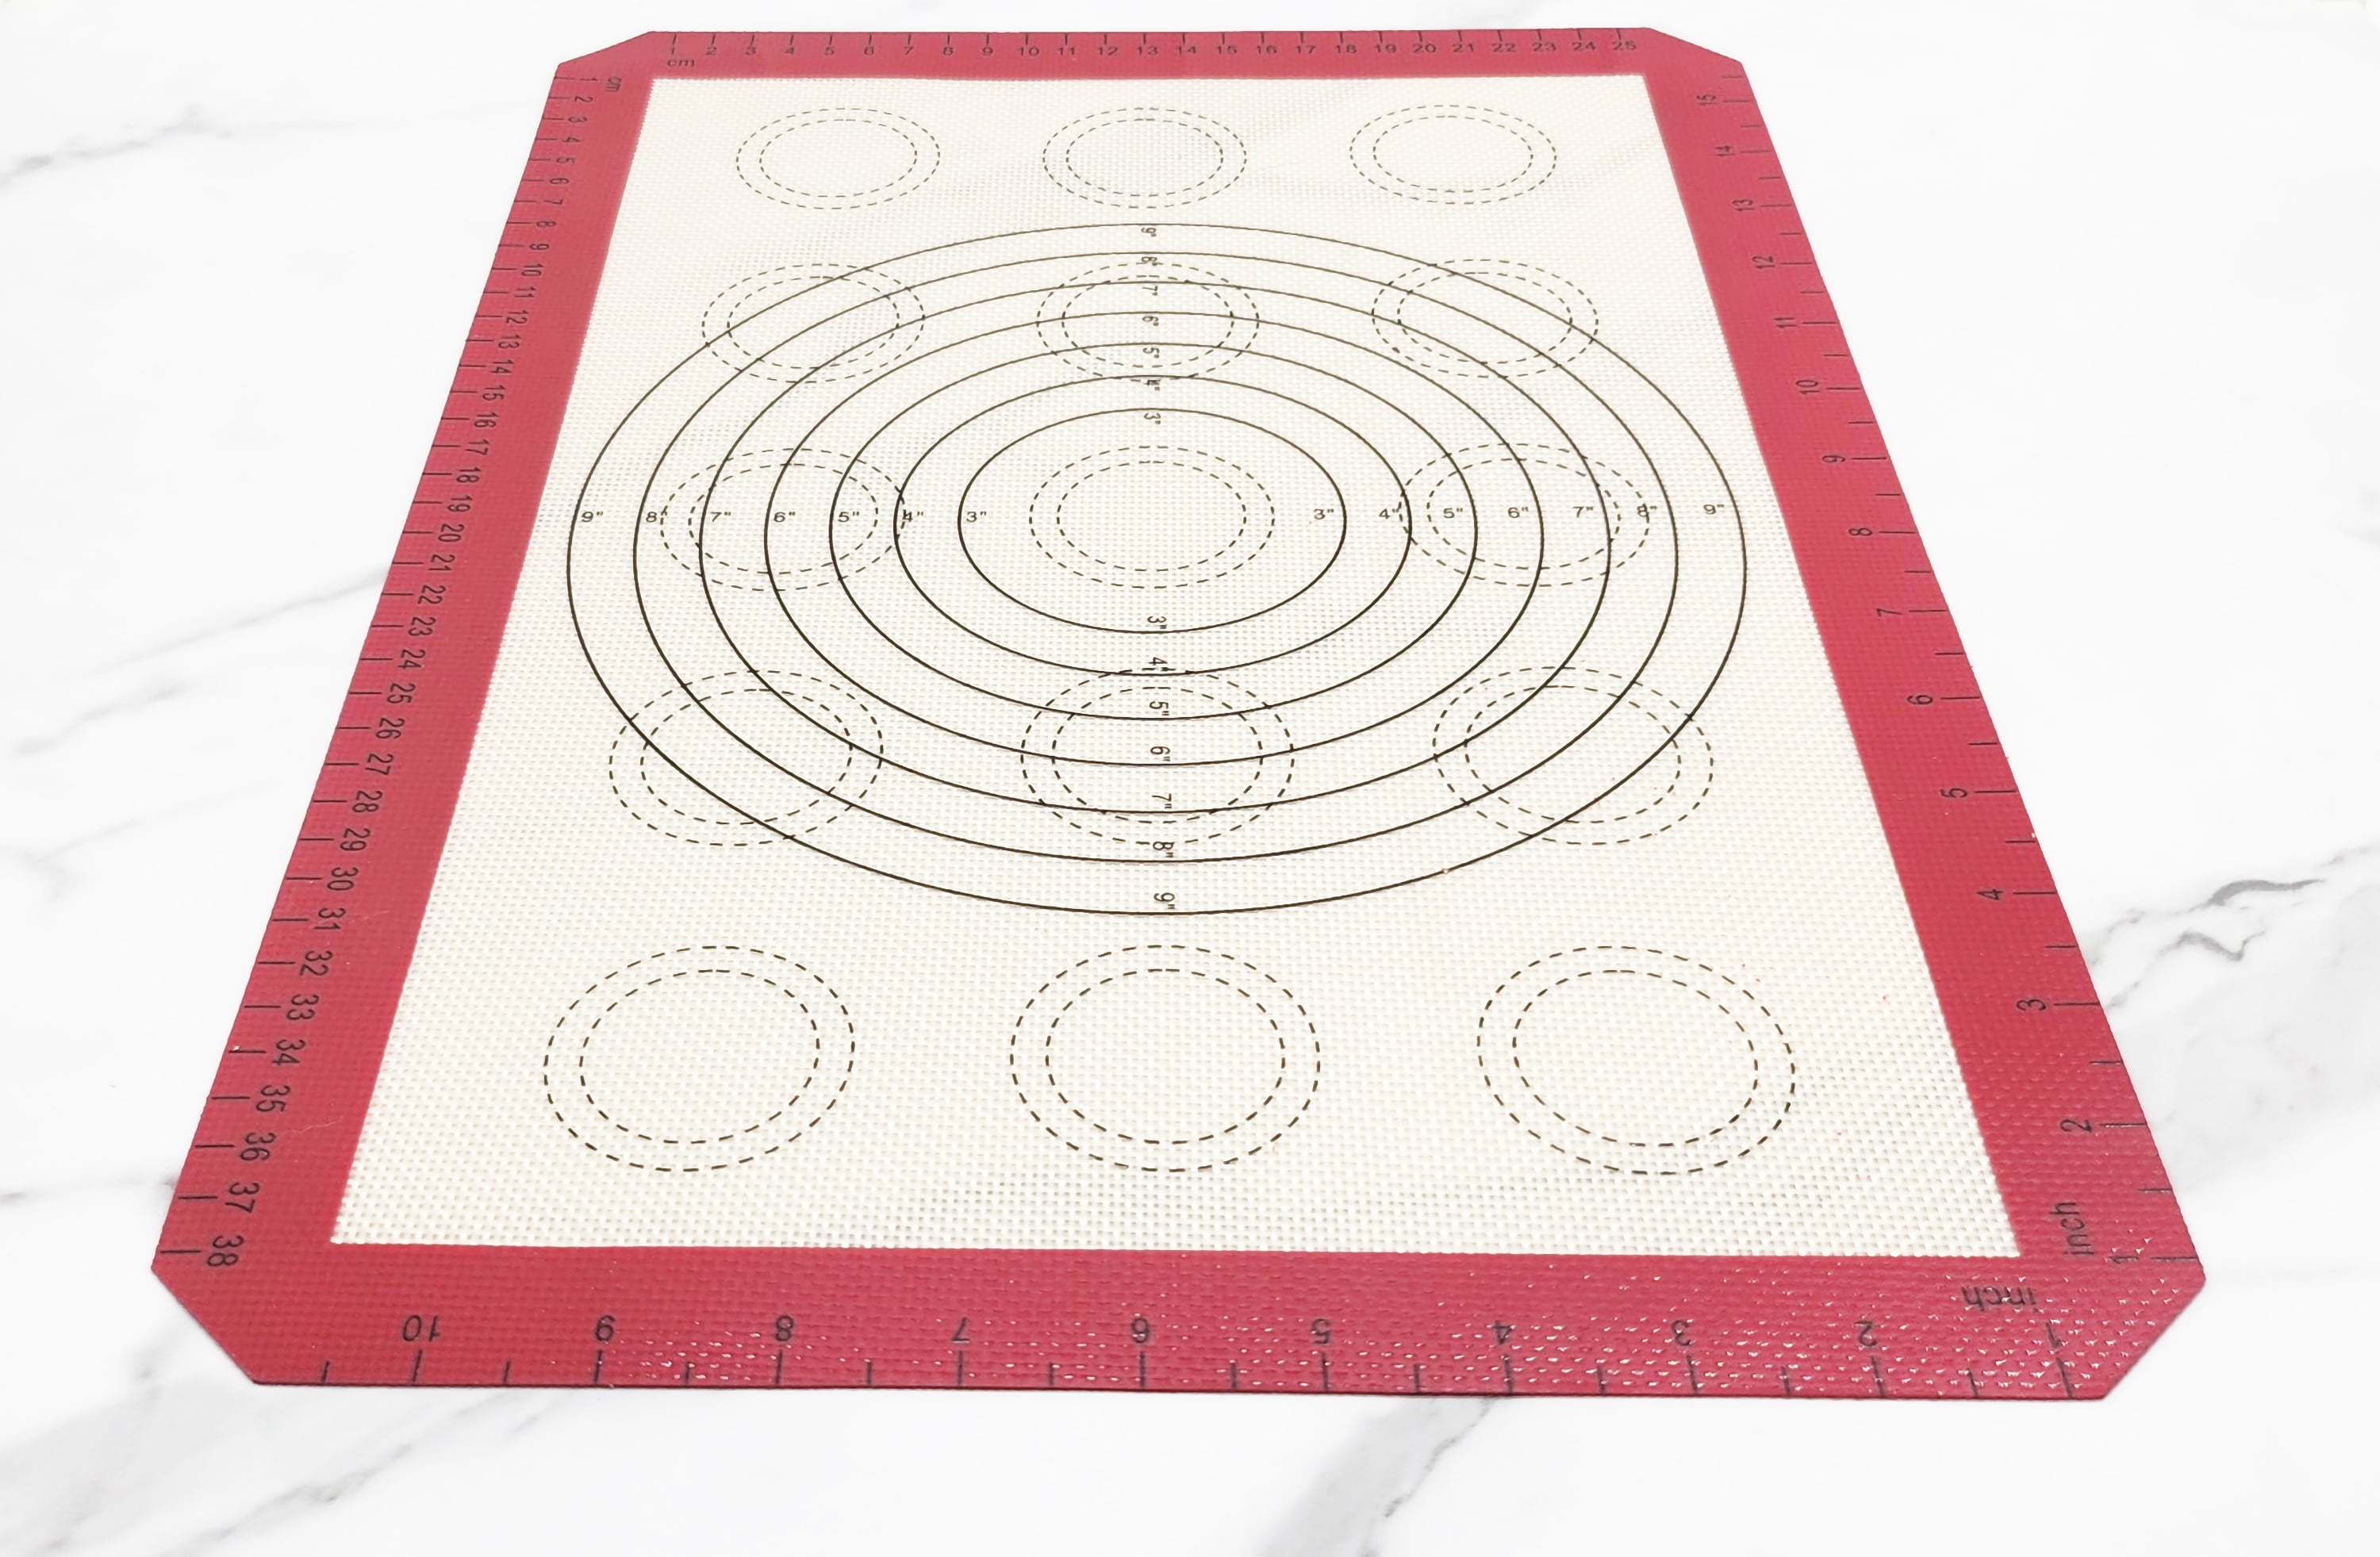 Mainstays Reusable Silicone Baking Mat - Measures 16.5 x 11.6